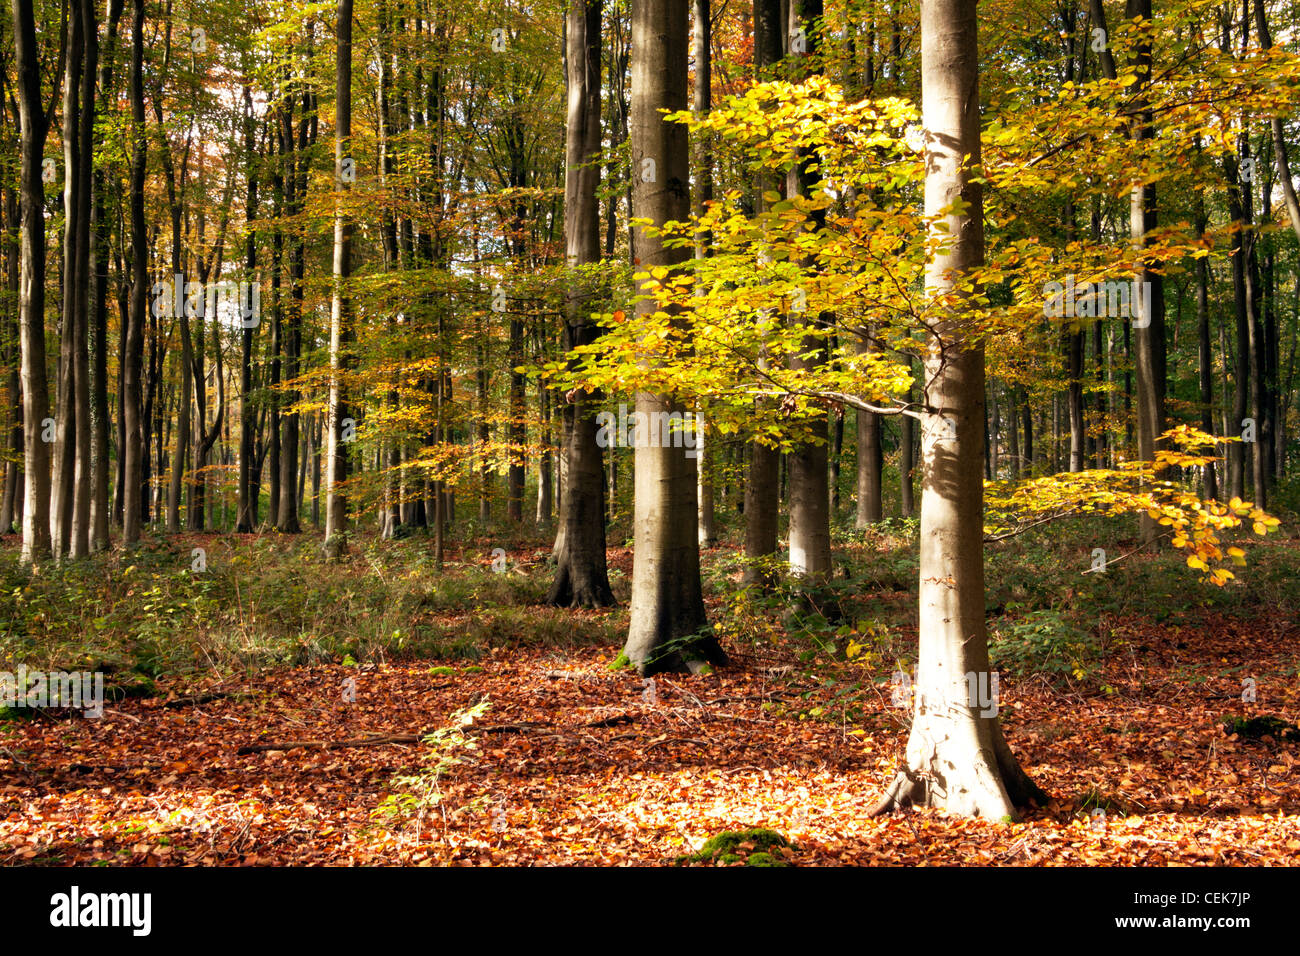 Beech trees lit by autumn sunshine in West Woods near Marlborough in Wiltshire, England. Stock Photo